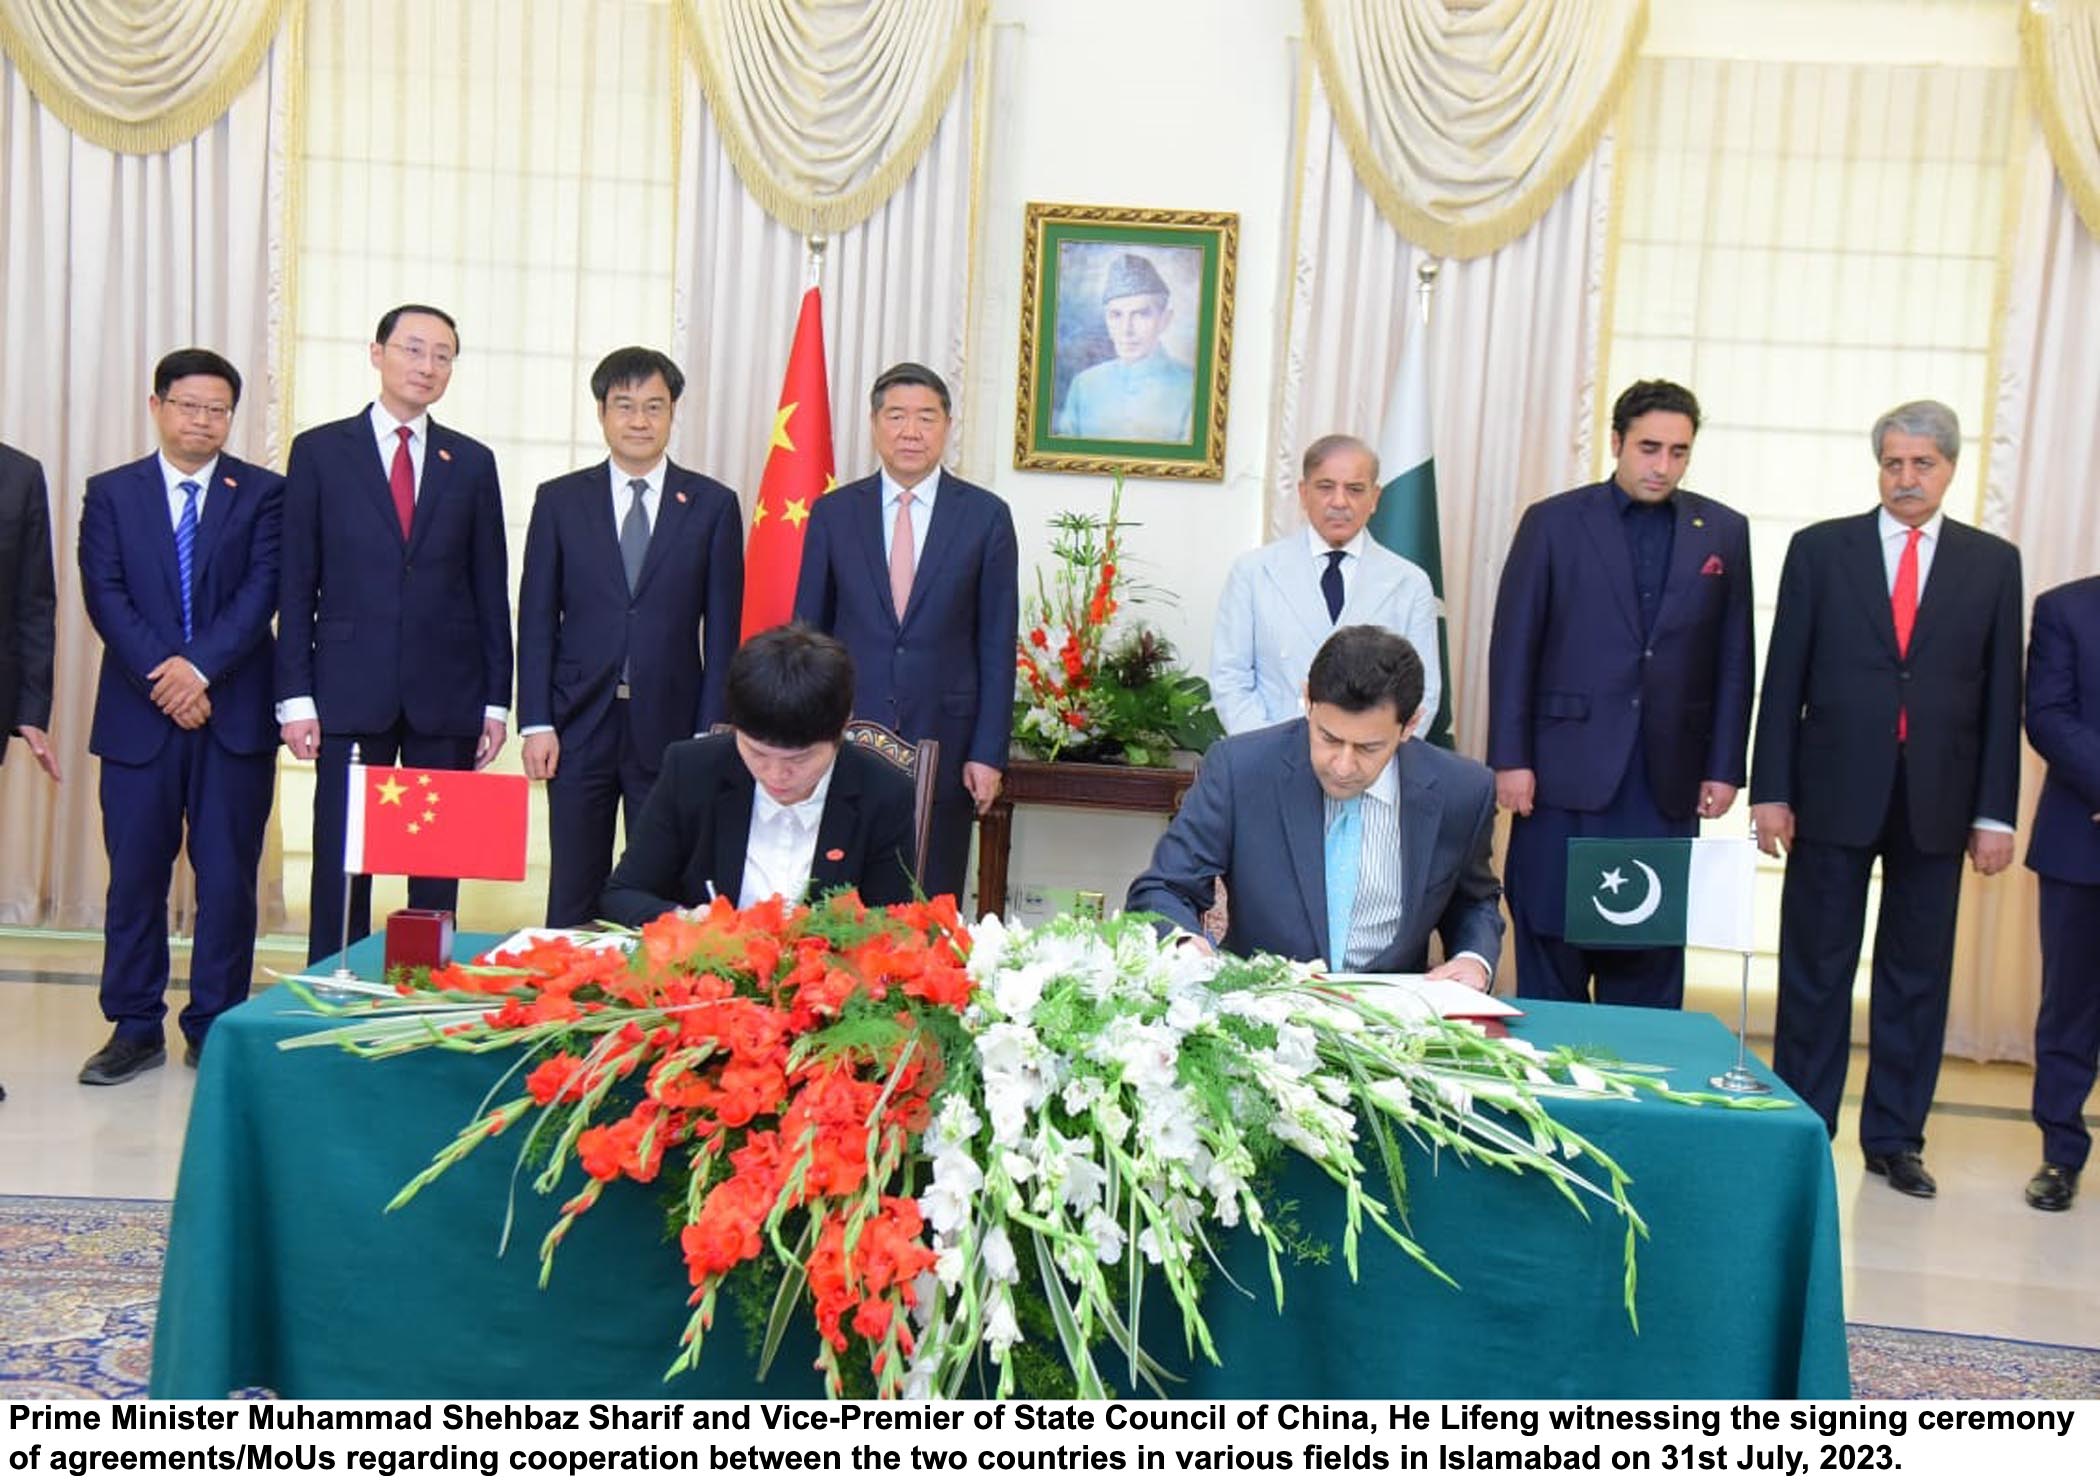   Pakistan and China Celebrate 10th Anniversary of CPEC in Islamabad